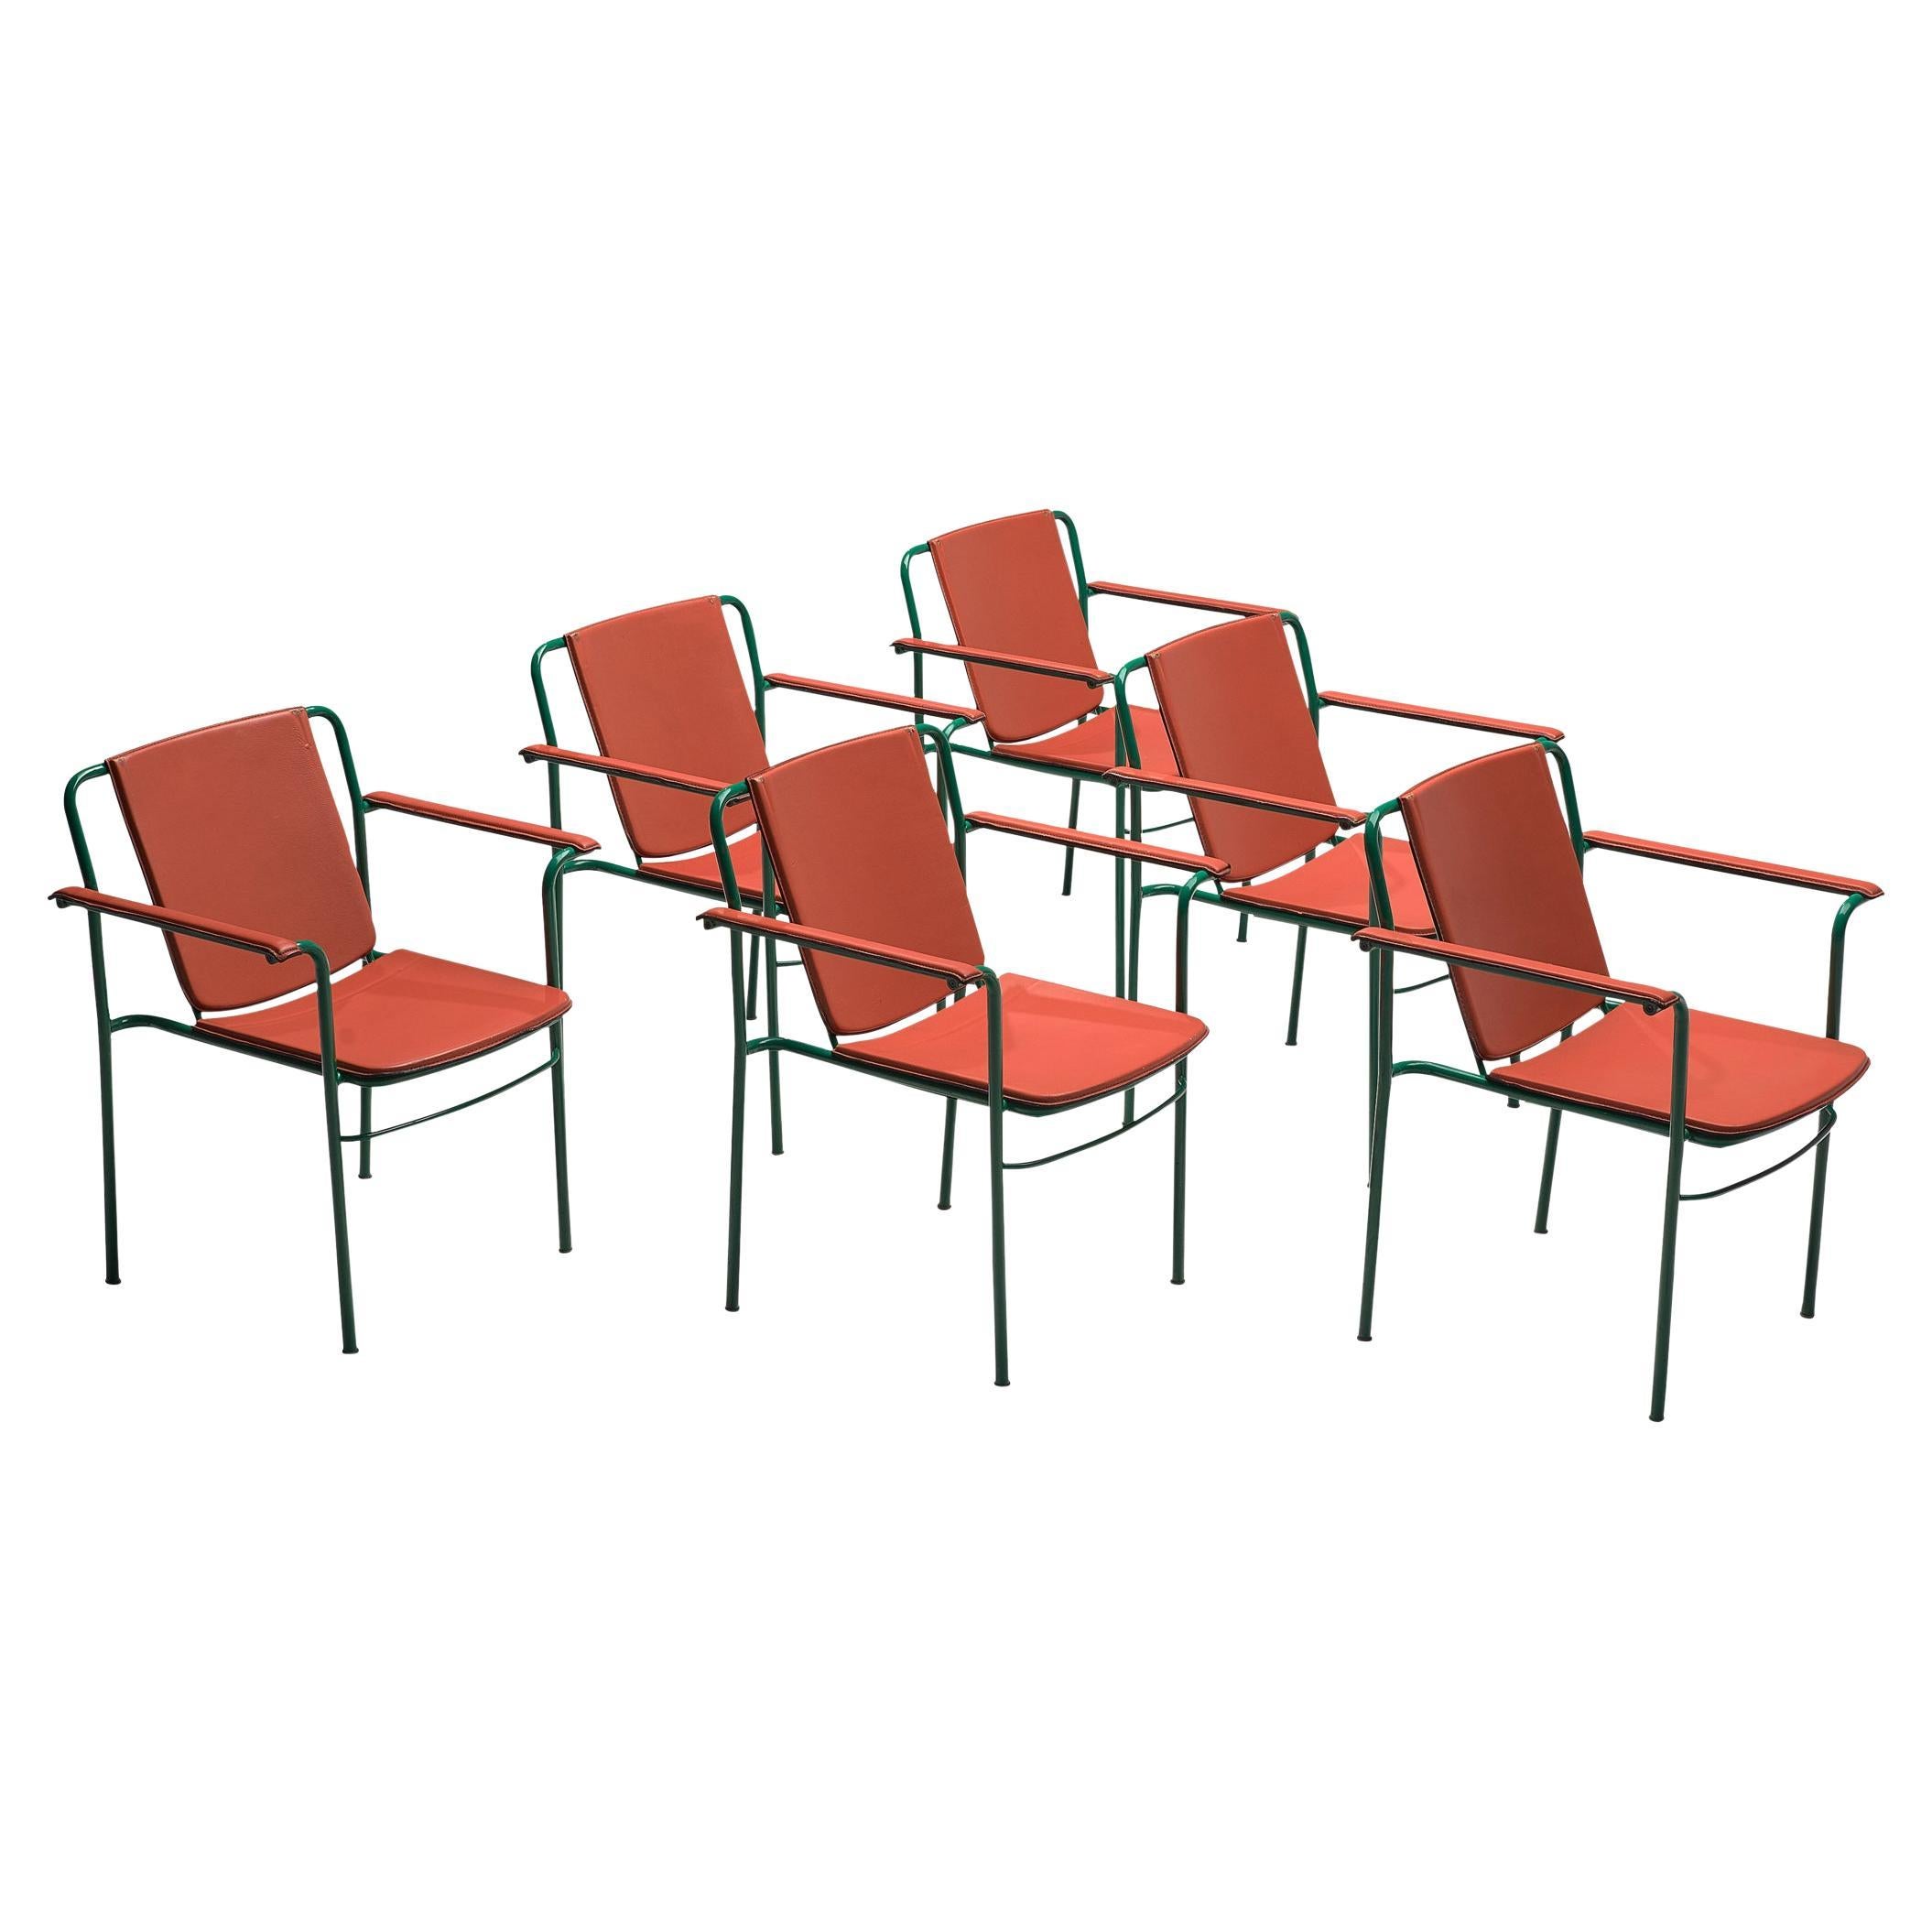 Mario Marenco for Poltrona Frau Set of Six 'Movie' Chairs in Red Leather